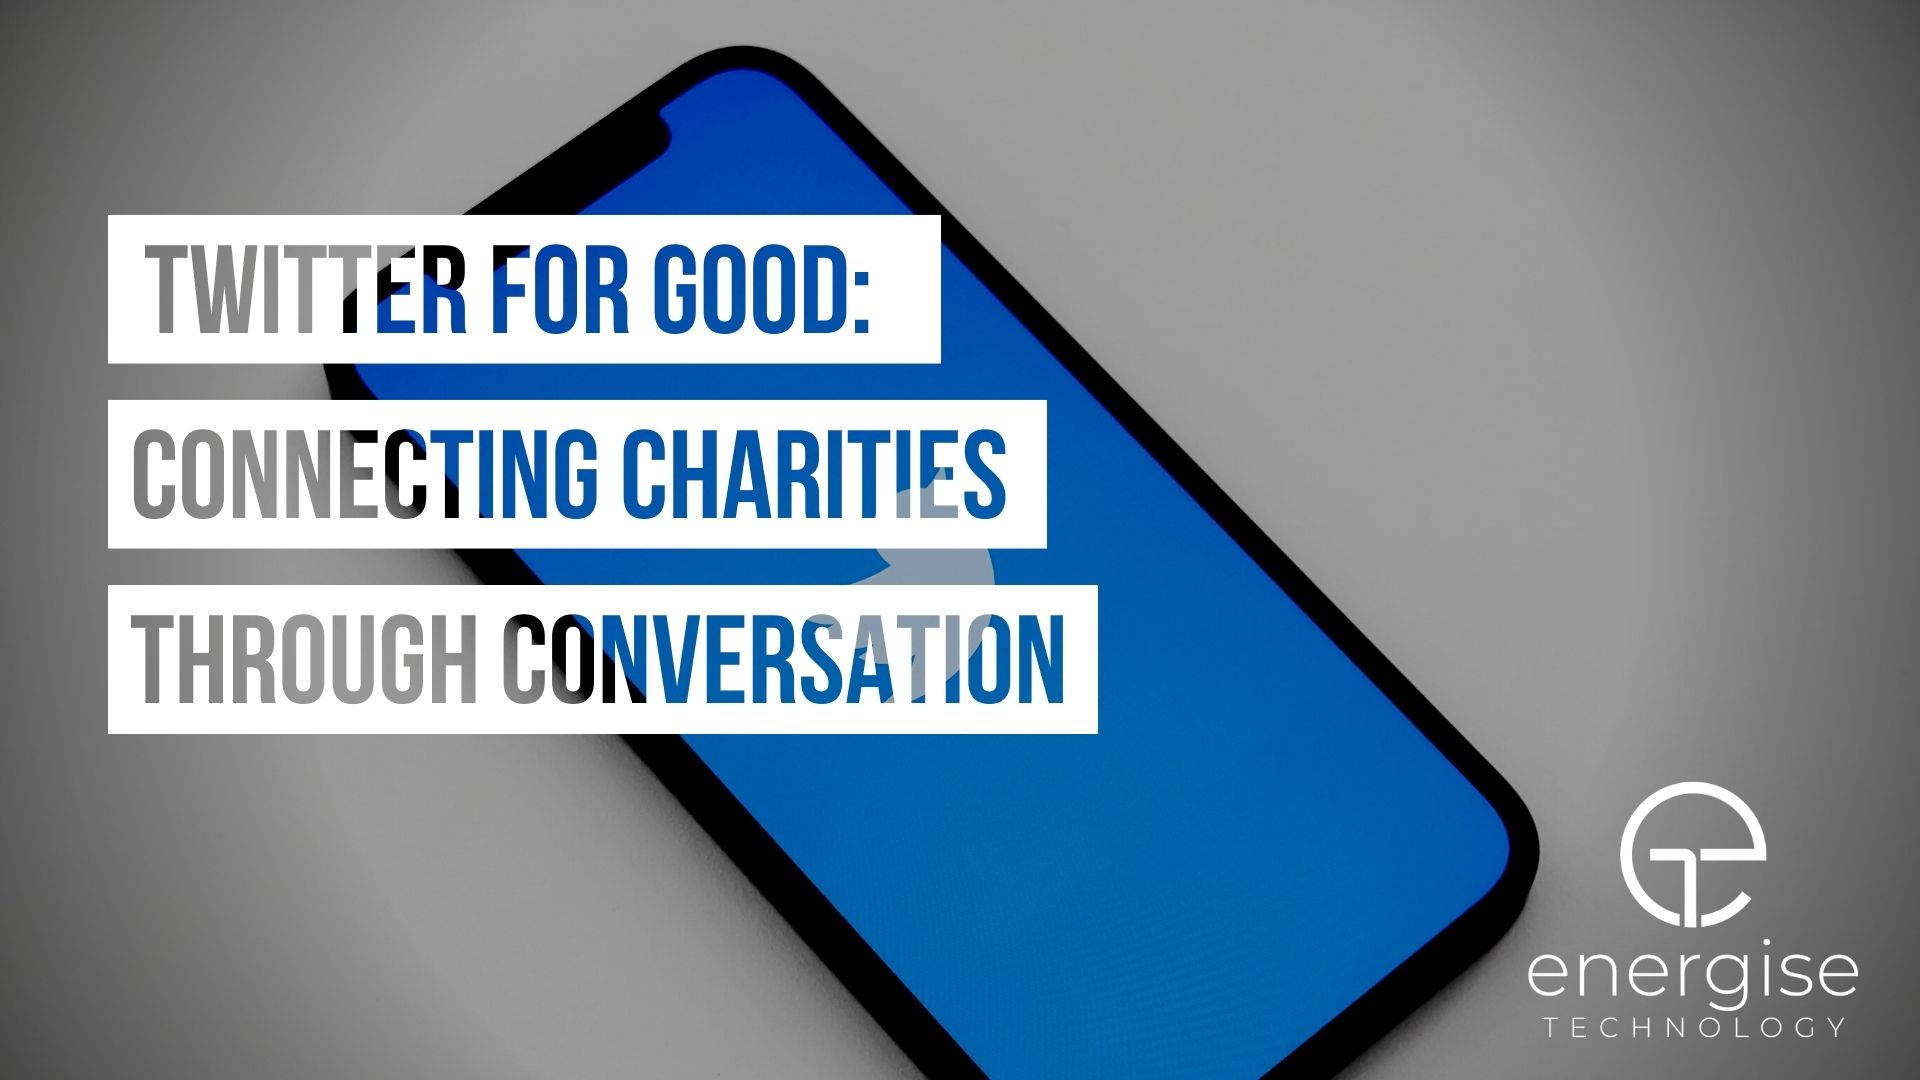 Twitter For Good: Connecting Charities Through Conversation